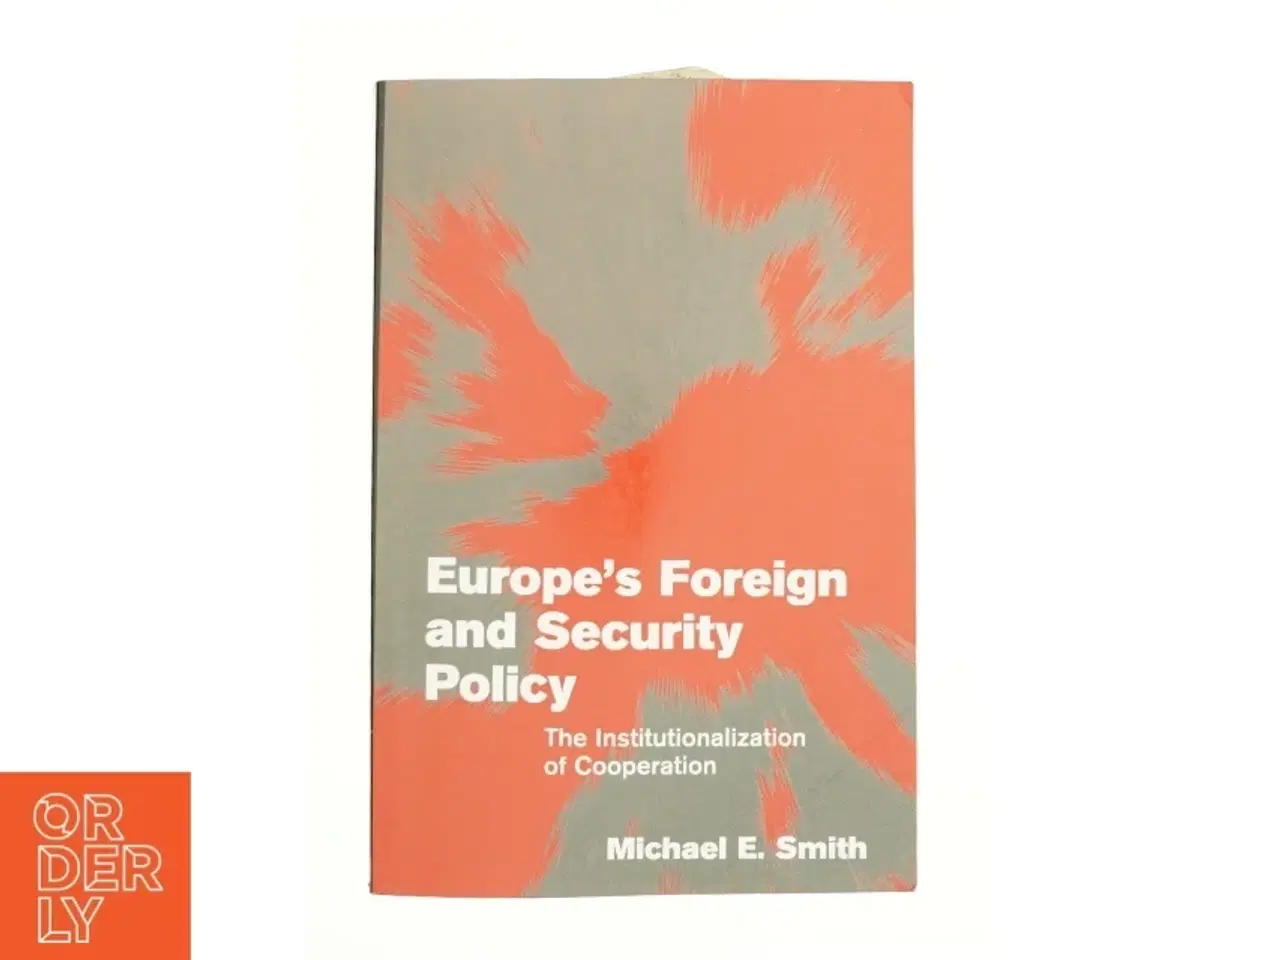 Billede 1 - Europe's Foreign and Security Policy: the Institutionalization of Cooperation af Michael E. Smith (Bog)